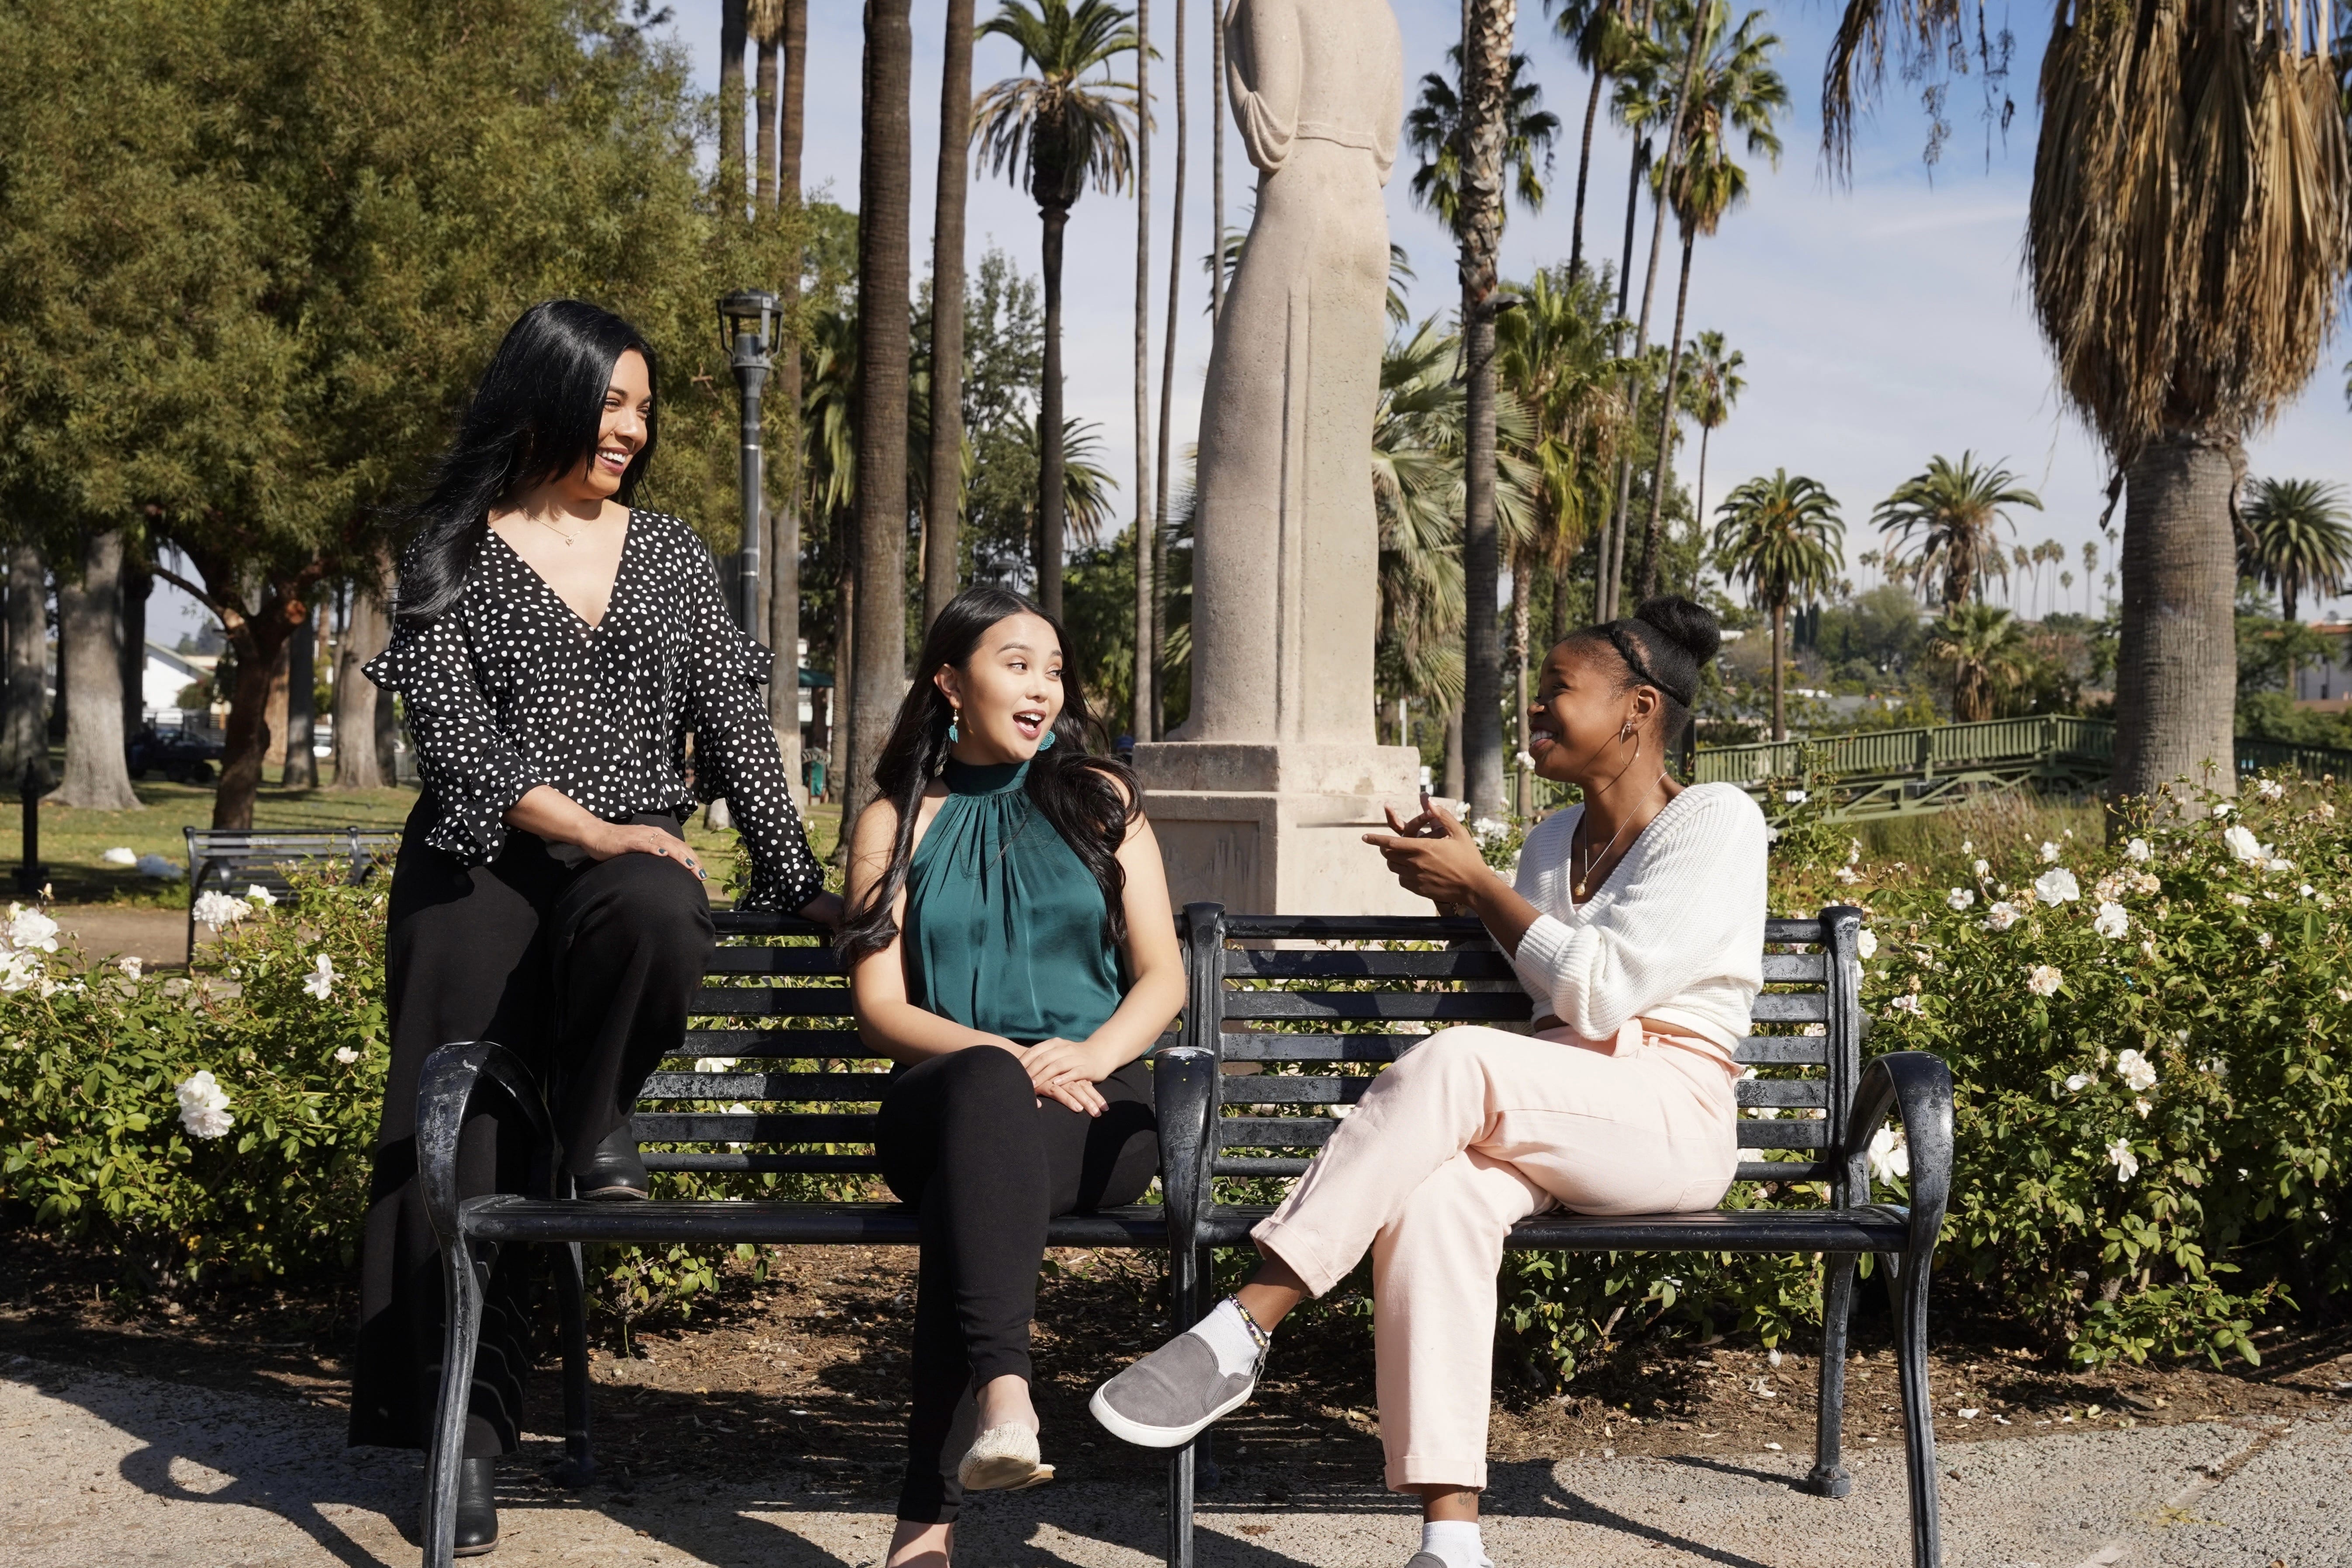 Stella Nova therapists in Los Angeles relaxing together on a bench in Echo Park.